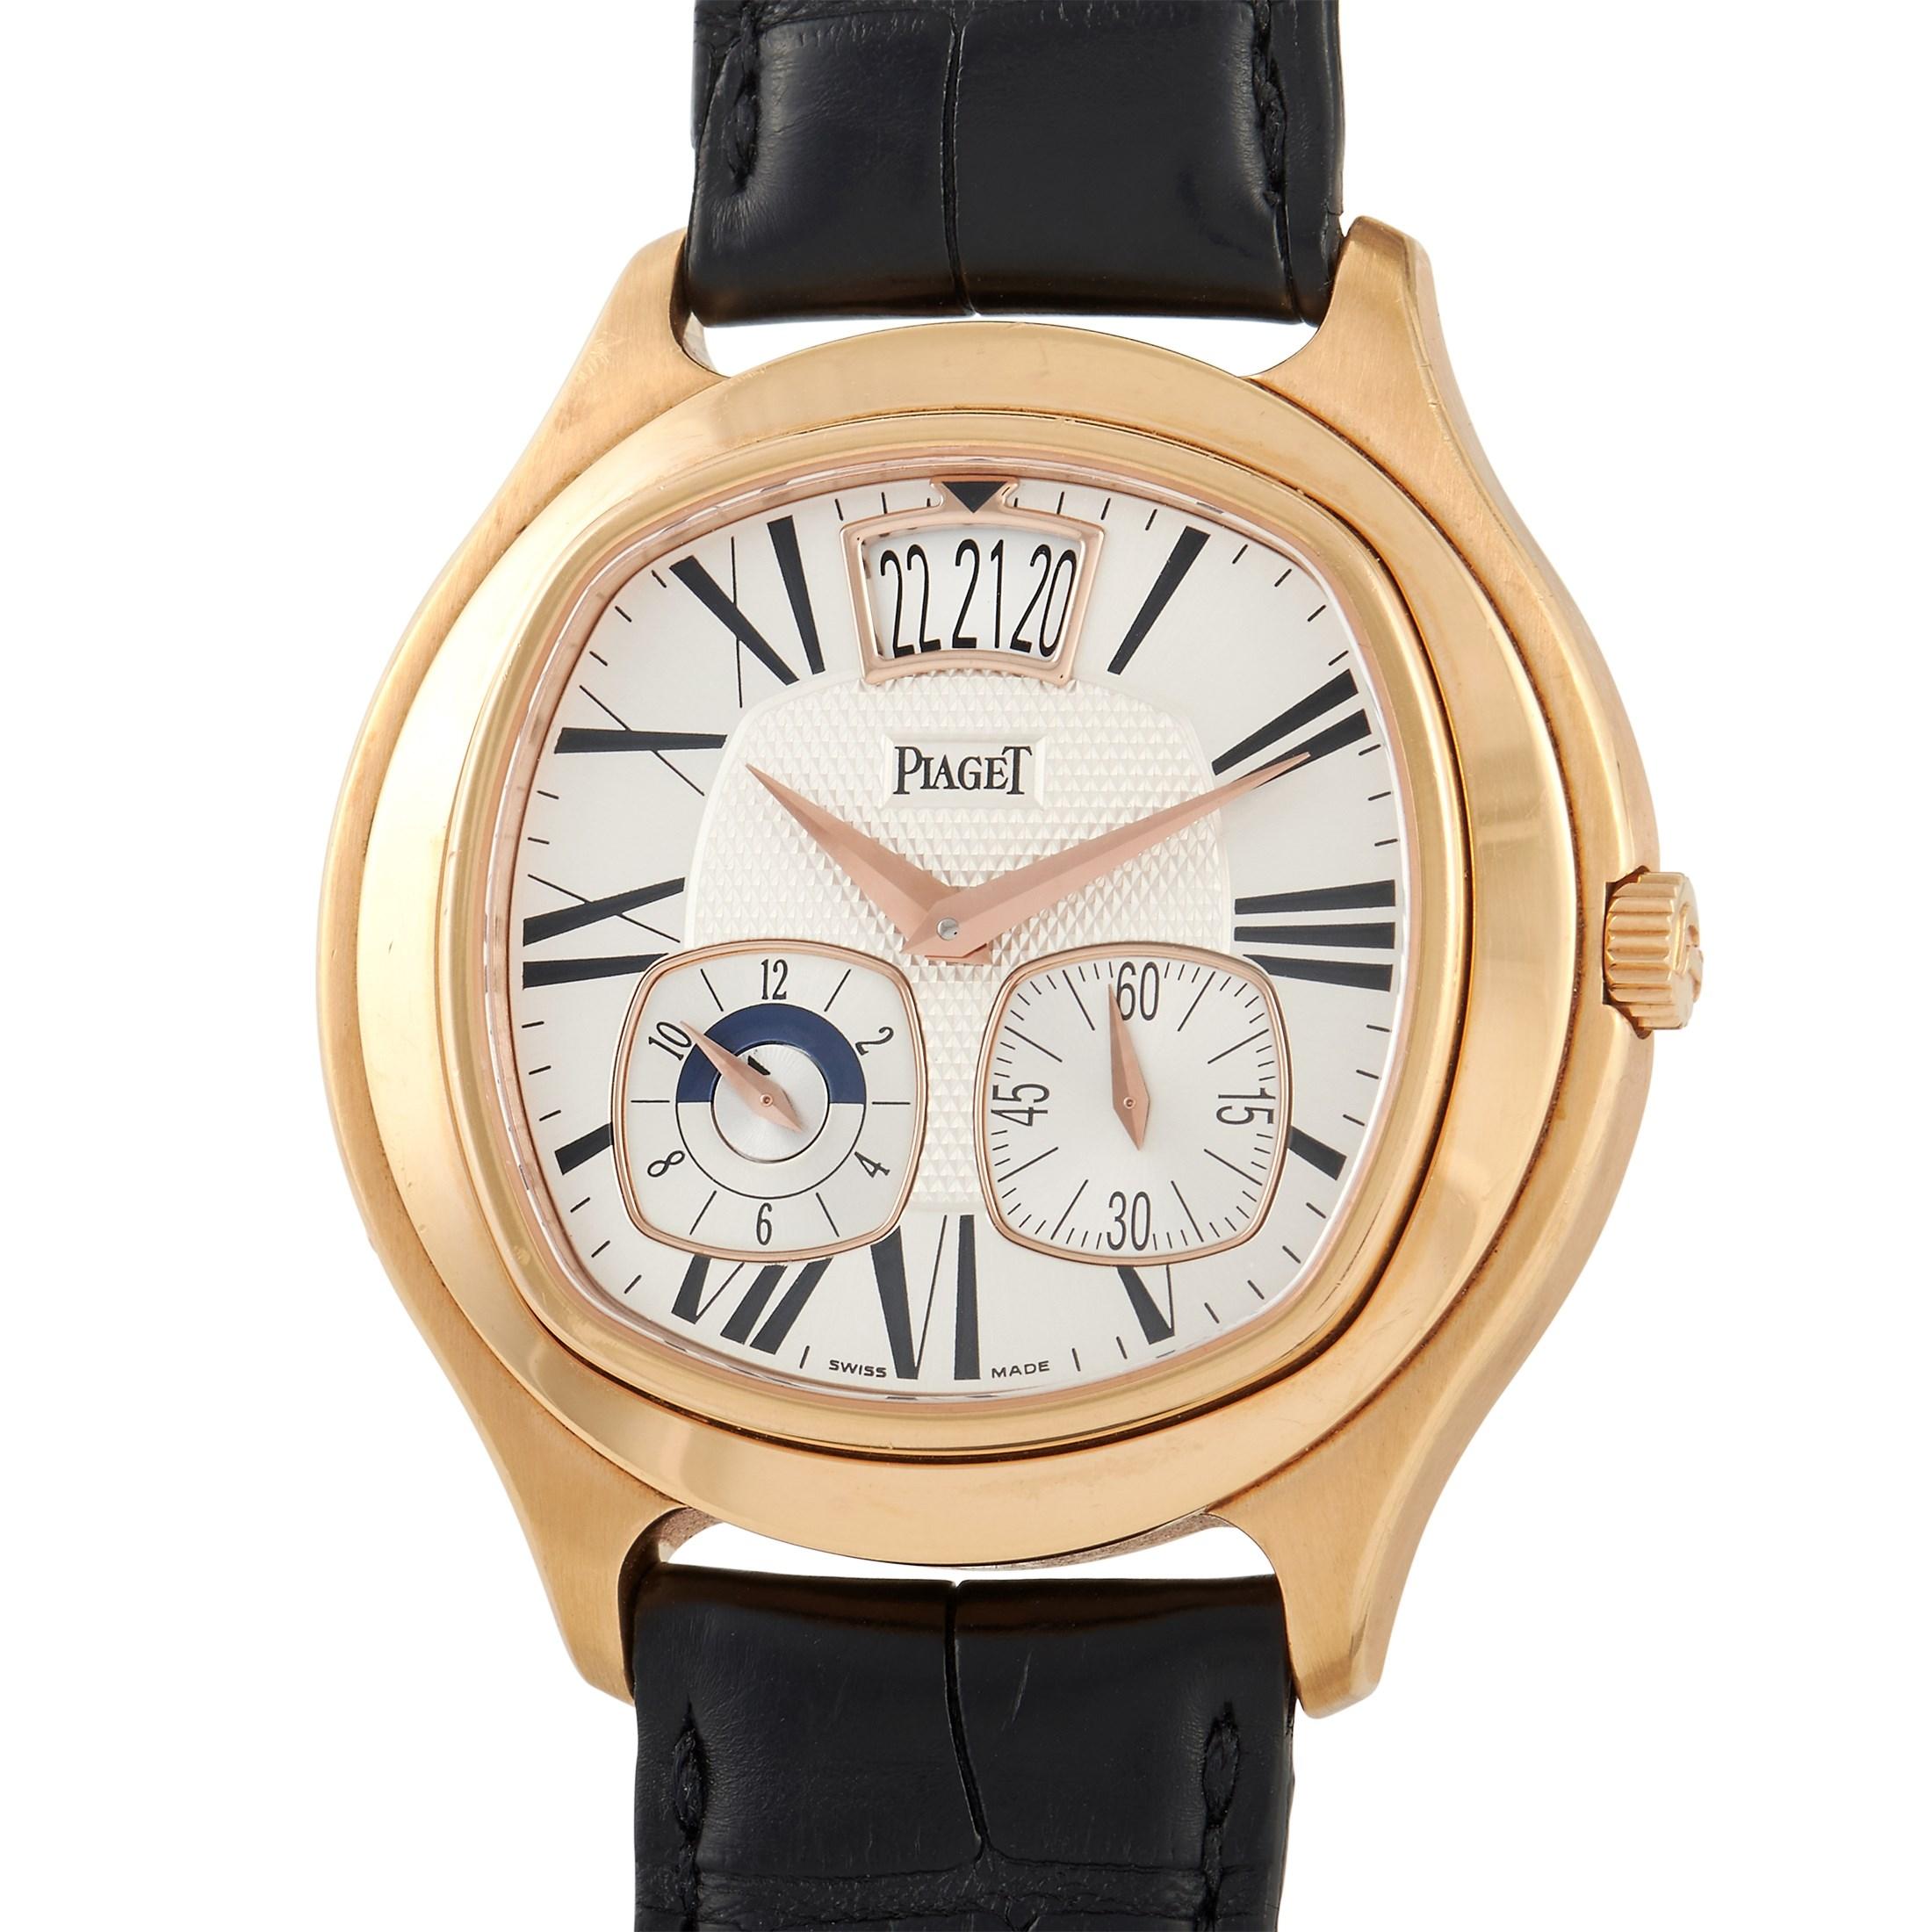 This Limited Edition Piaget Emperador Dual Time Rose Gold Watch GOA32017 is perfect for travelers. The watch is equipped with a dual time zone display plus a day/night indicator; each set in cushion-shaped sub-dials. A large date window at 12